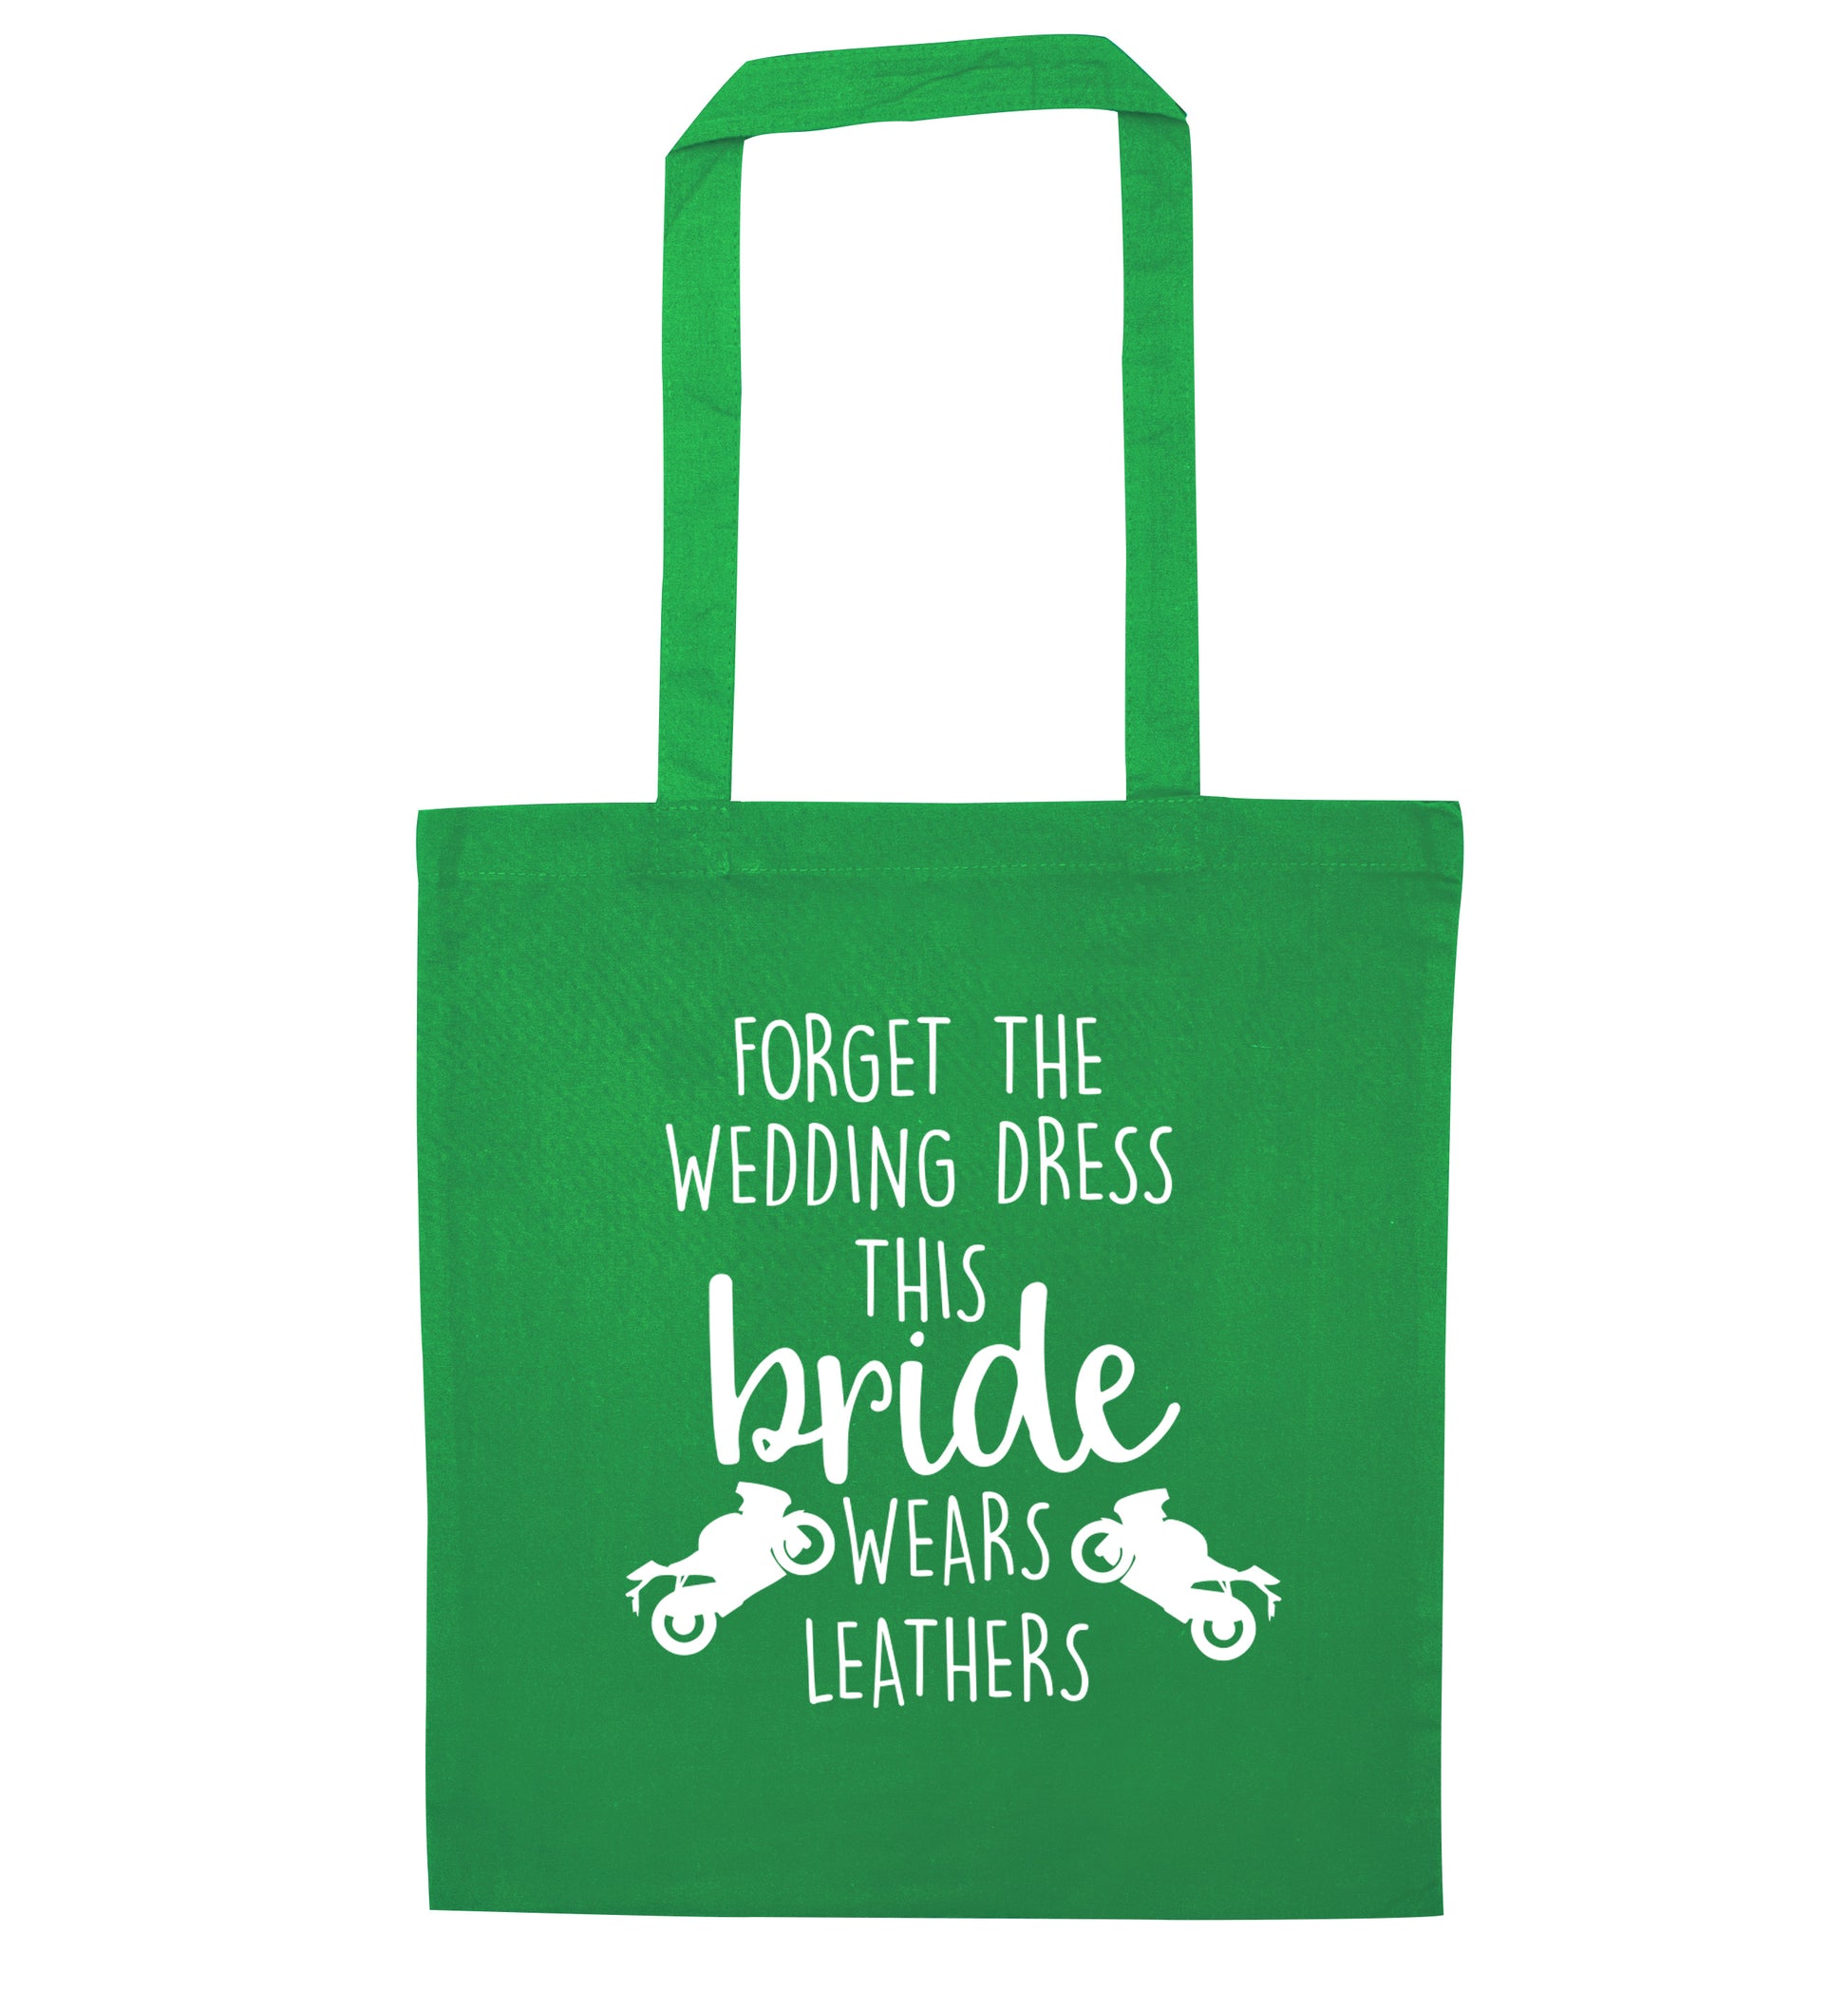 Forget the wedding dress this bride wears leathers green tote bag